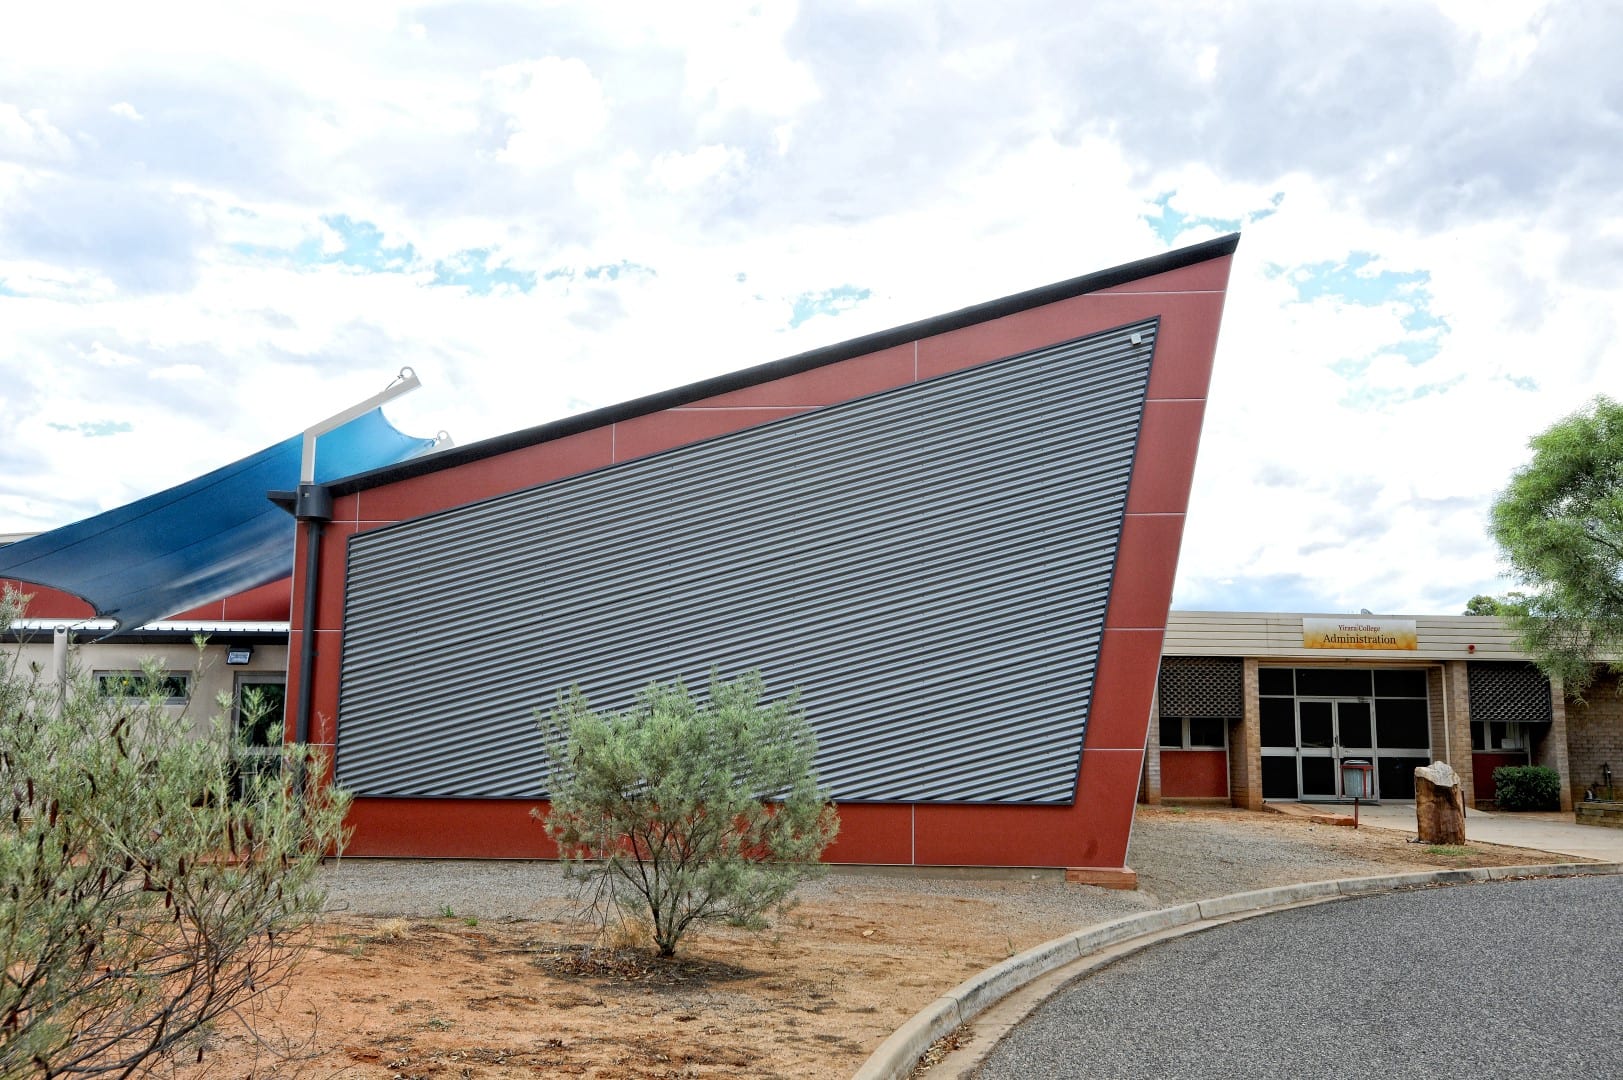 New LibraryConstruction Companies Alice Springs